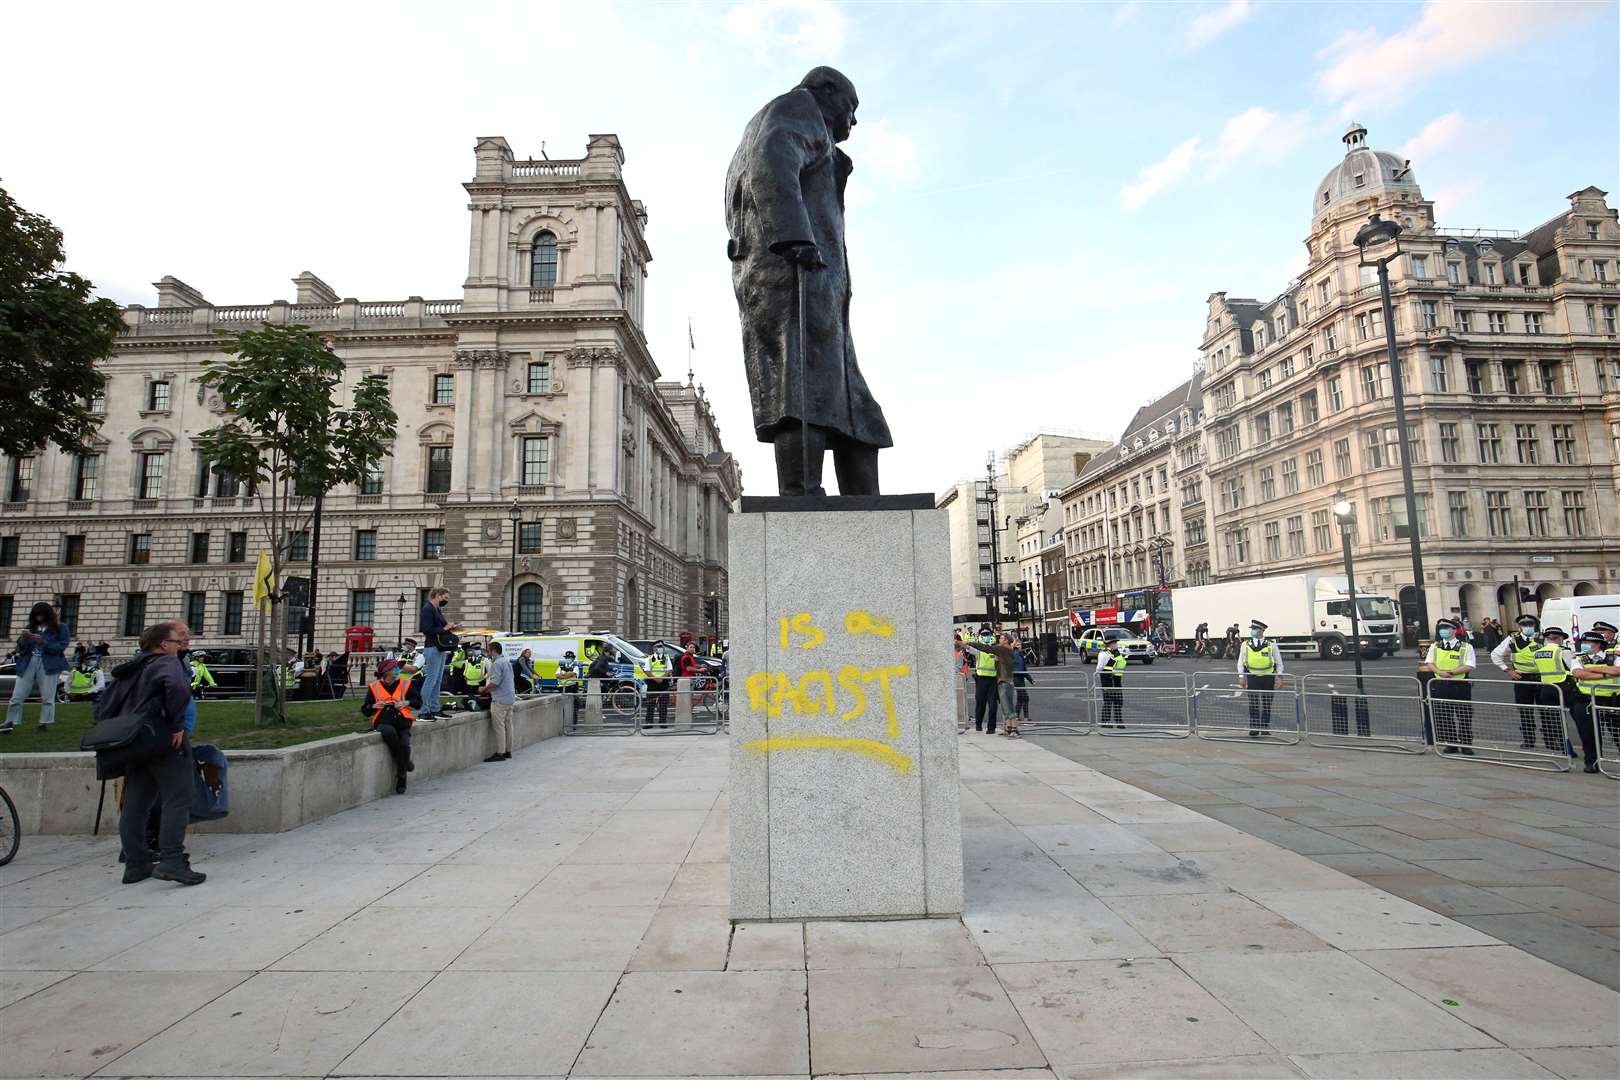 Police in a cordon around the statue of Winston Churchill, after it was vandalised (Jonathan Brady/PA)